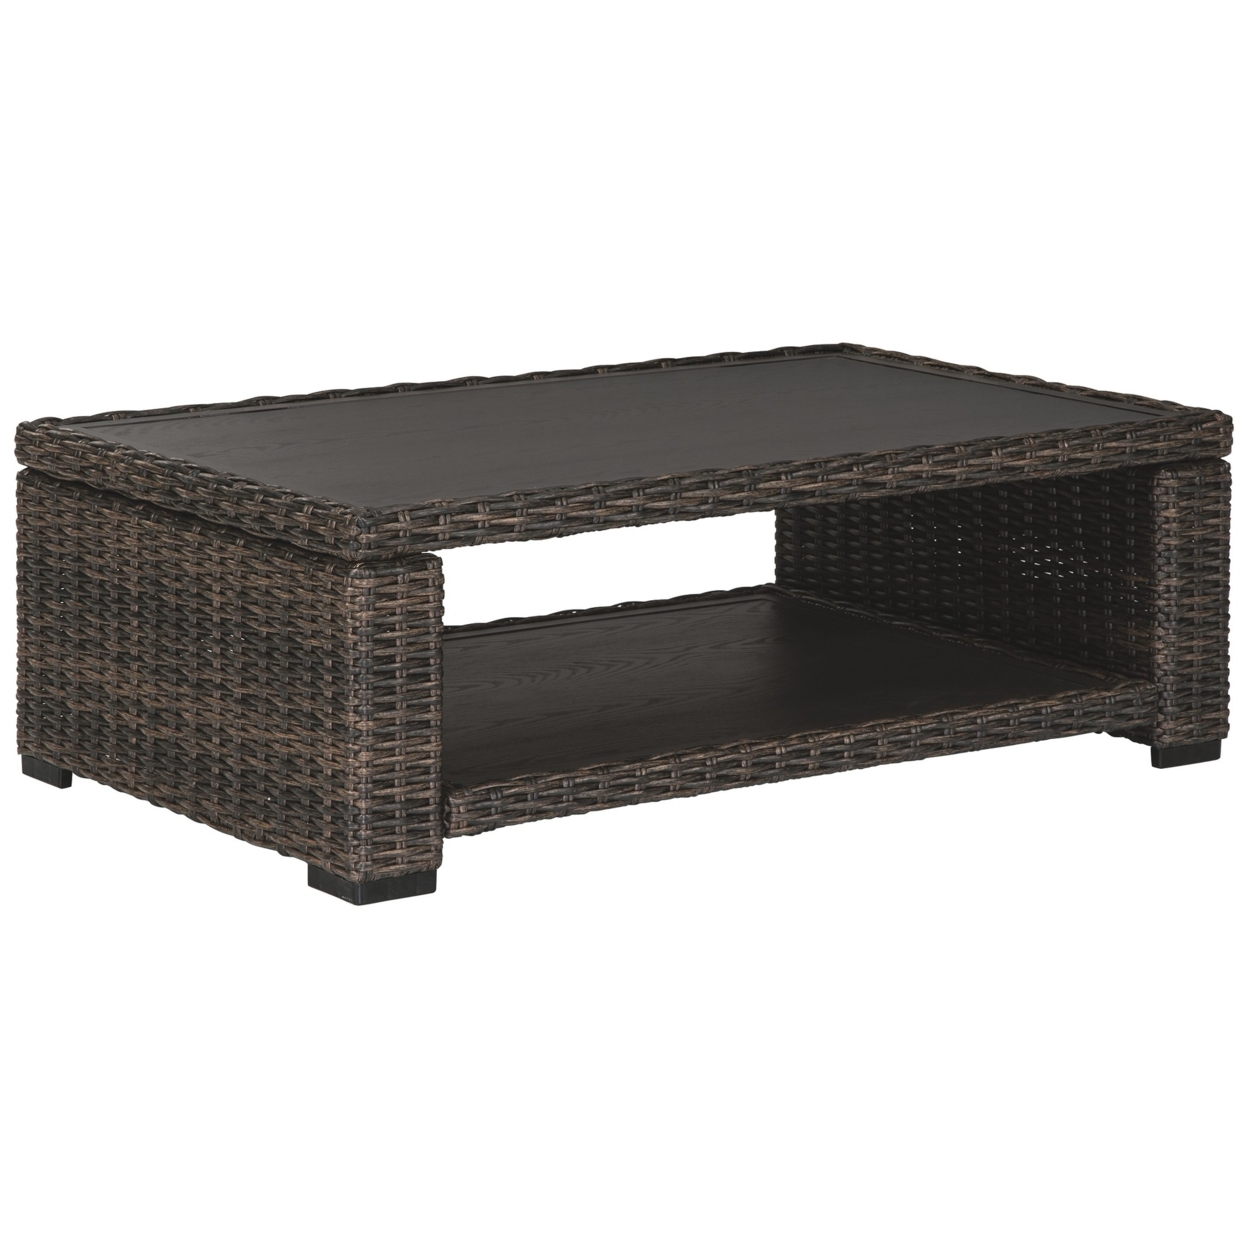 Wicker Woven Aluminum Frame Cocktail Table With Open Shelf, Brown And Black- Saltoro Sherpi